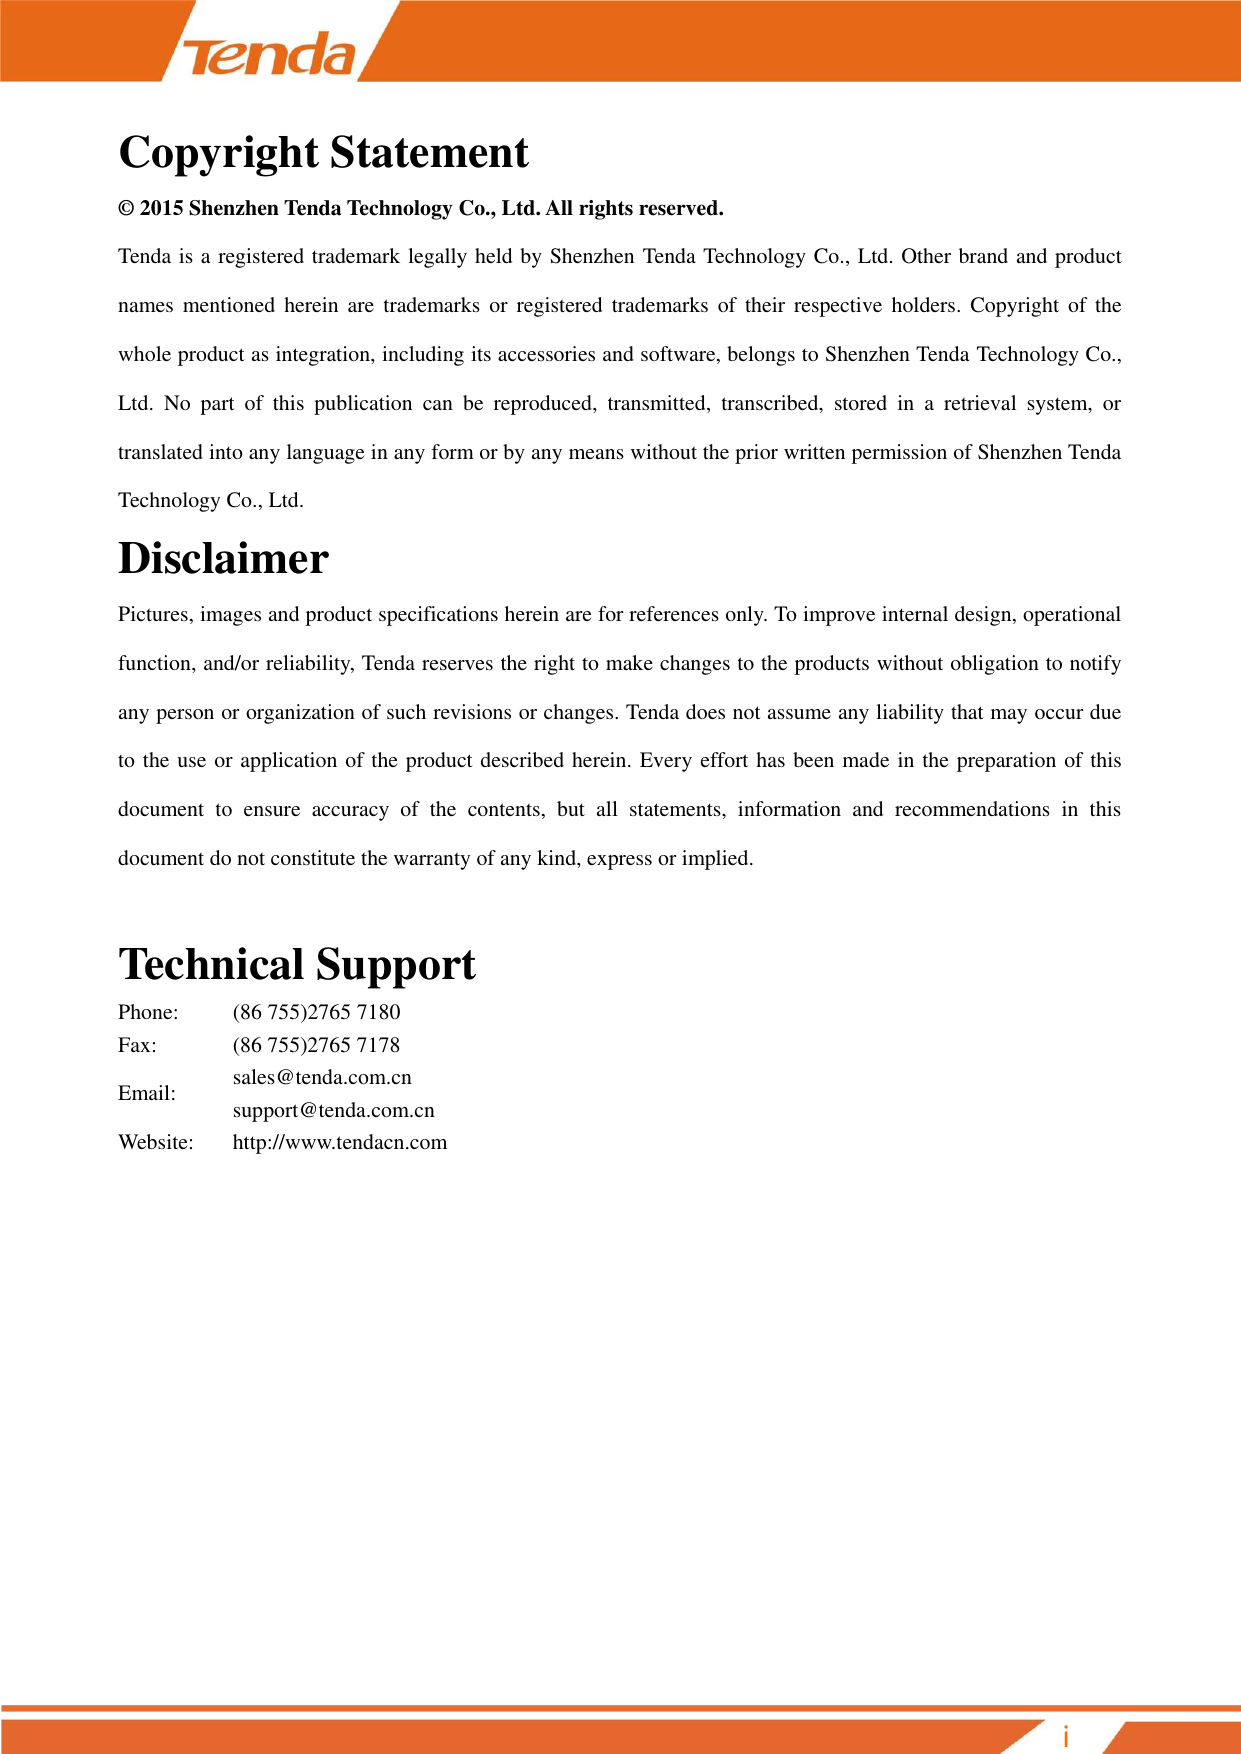         i Copyright Statement © 2015 Shenzhen Tenda Technology Co., Ltd. All rights reserved.   Tenda is a registered trademark legally held by Shenzhen Tenda Technology Co., Ltd. Other brand and product names  mentioned  herein  are  trademarks  or  registered  trademarks  of  their  respective  holders.  Copyright  of  the whole product as integration, including its accessories and software, belongs to Shenzhen Tenda Technology Co., Ltd.  No  part  of  this  publication  can  be  reproduced,  transmitted,  transcribed,  stored  in  a  retrieval  system,  or translated into any language in any form or by any means without the prior written permission of Shenzhen Tenda Technology Co., Ltd. Disclaimer   Pictures, images and product specifications herein are for references only. To improve internal design, operational function, and/or reliability, Tenda reserves the right to make changes to the products without obligation to notify any person or organization of such revisions or changes. Tenda does not assume any liability that may occur due to the use or application of the product described herein. Every effort has been made in the preparation of this document  to  ensure  accuracy  of  the  contents,  but  all  statements,  information  and  recommendations  in  this document do not constitute the warranty of any kind, express or implied.  Technical Support Phone: (86 755)2765 7180 Fax: (86 755)2765 7178 Email: sales@tenda.com.cn support@tenda.com.cn Website: http://www.tendacn.com            